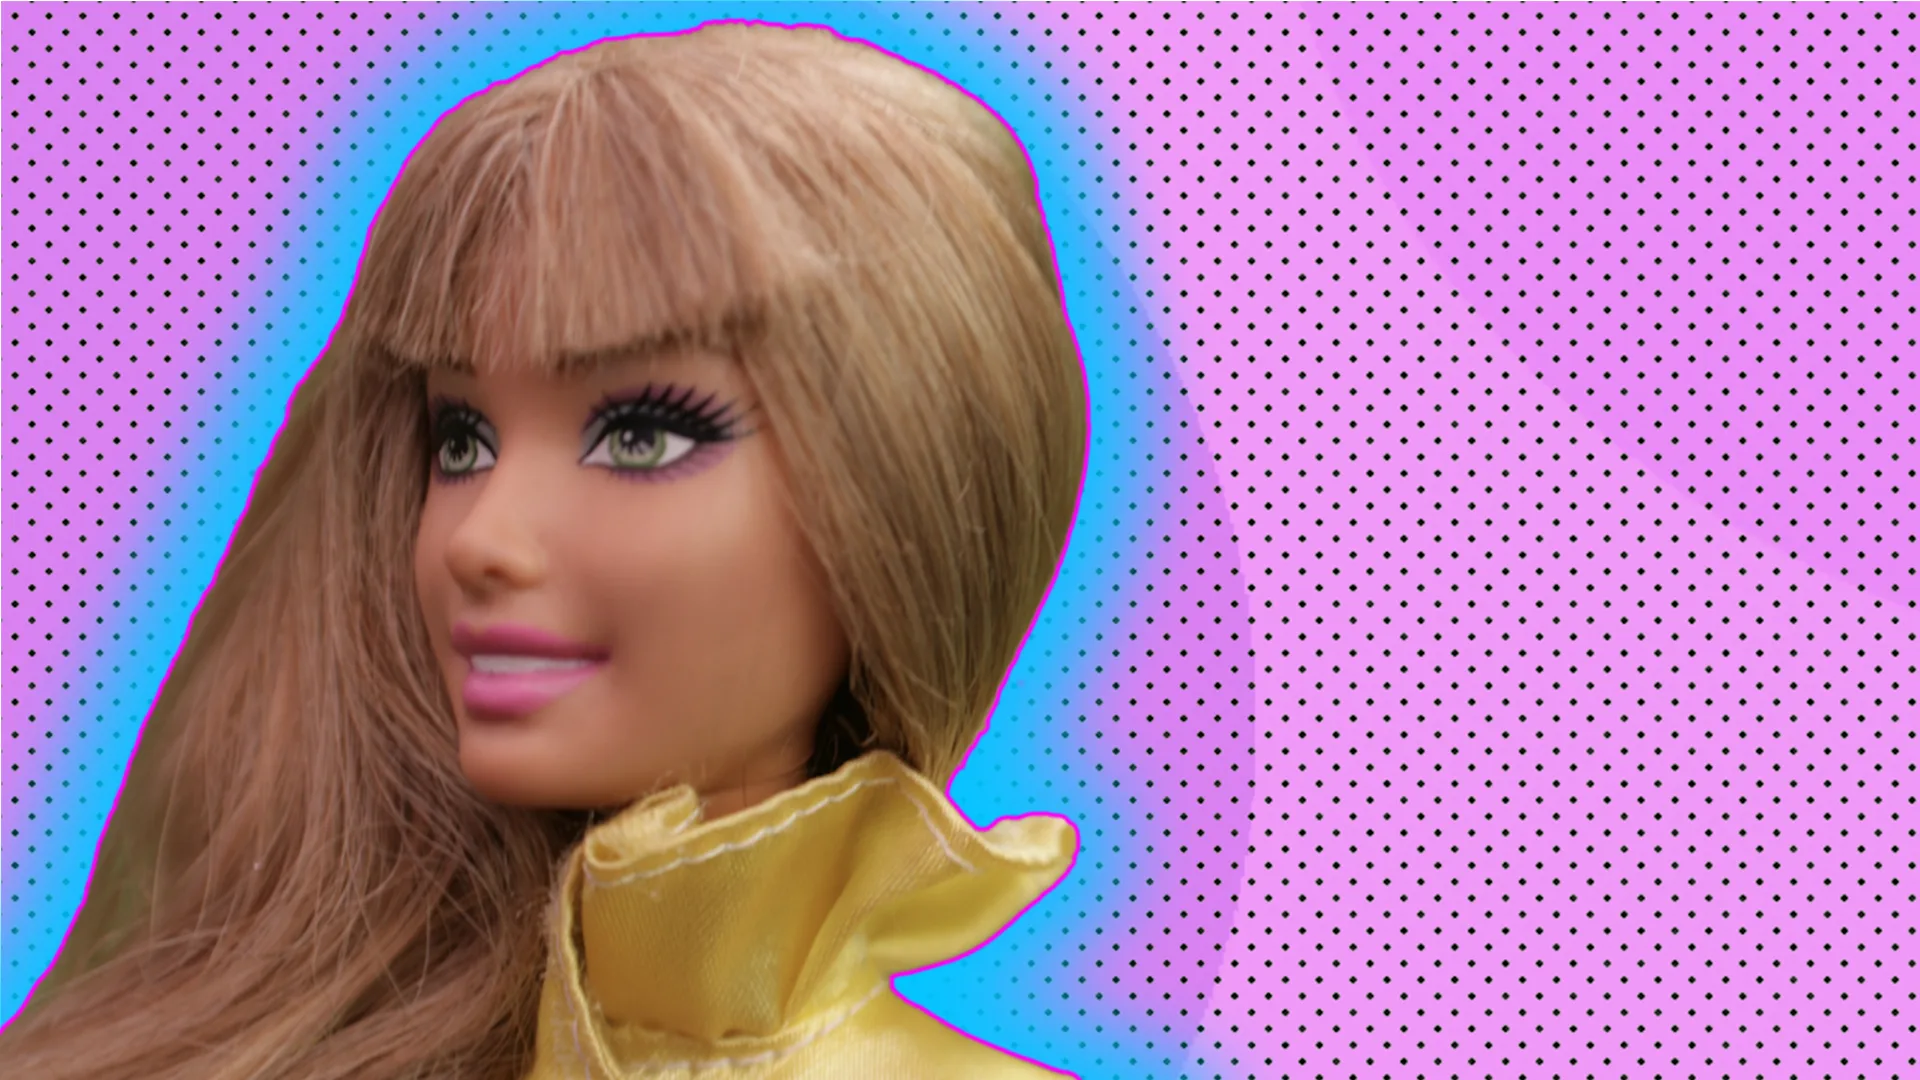 A blond barbie doll outlined by a light blue halo effect on a lilac dotted background